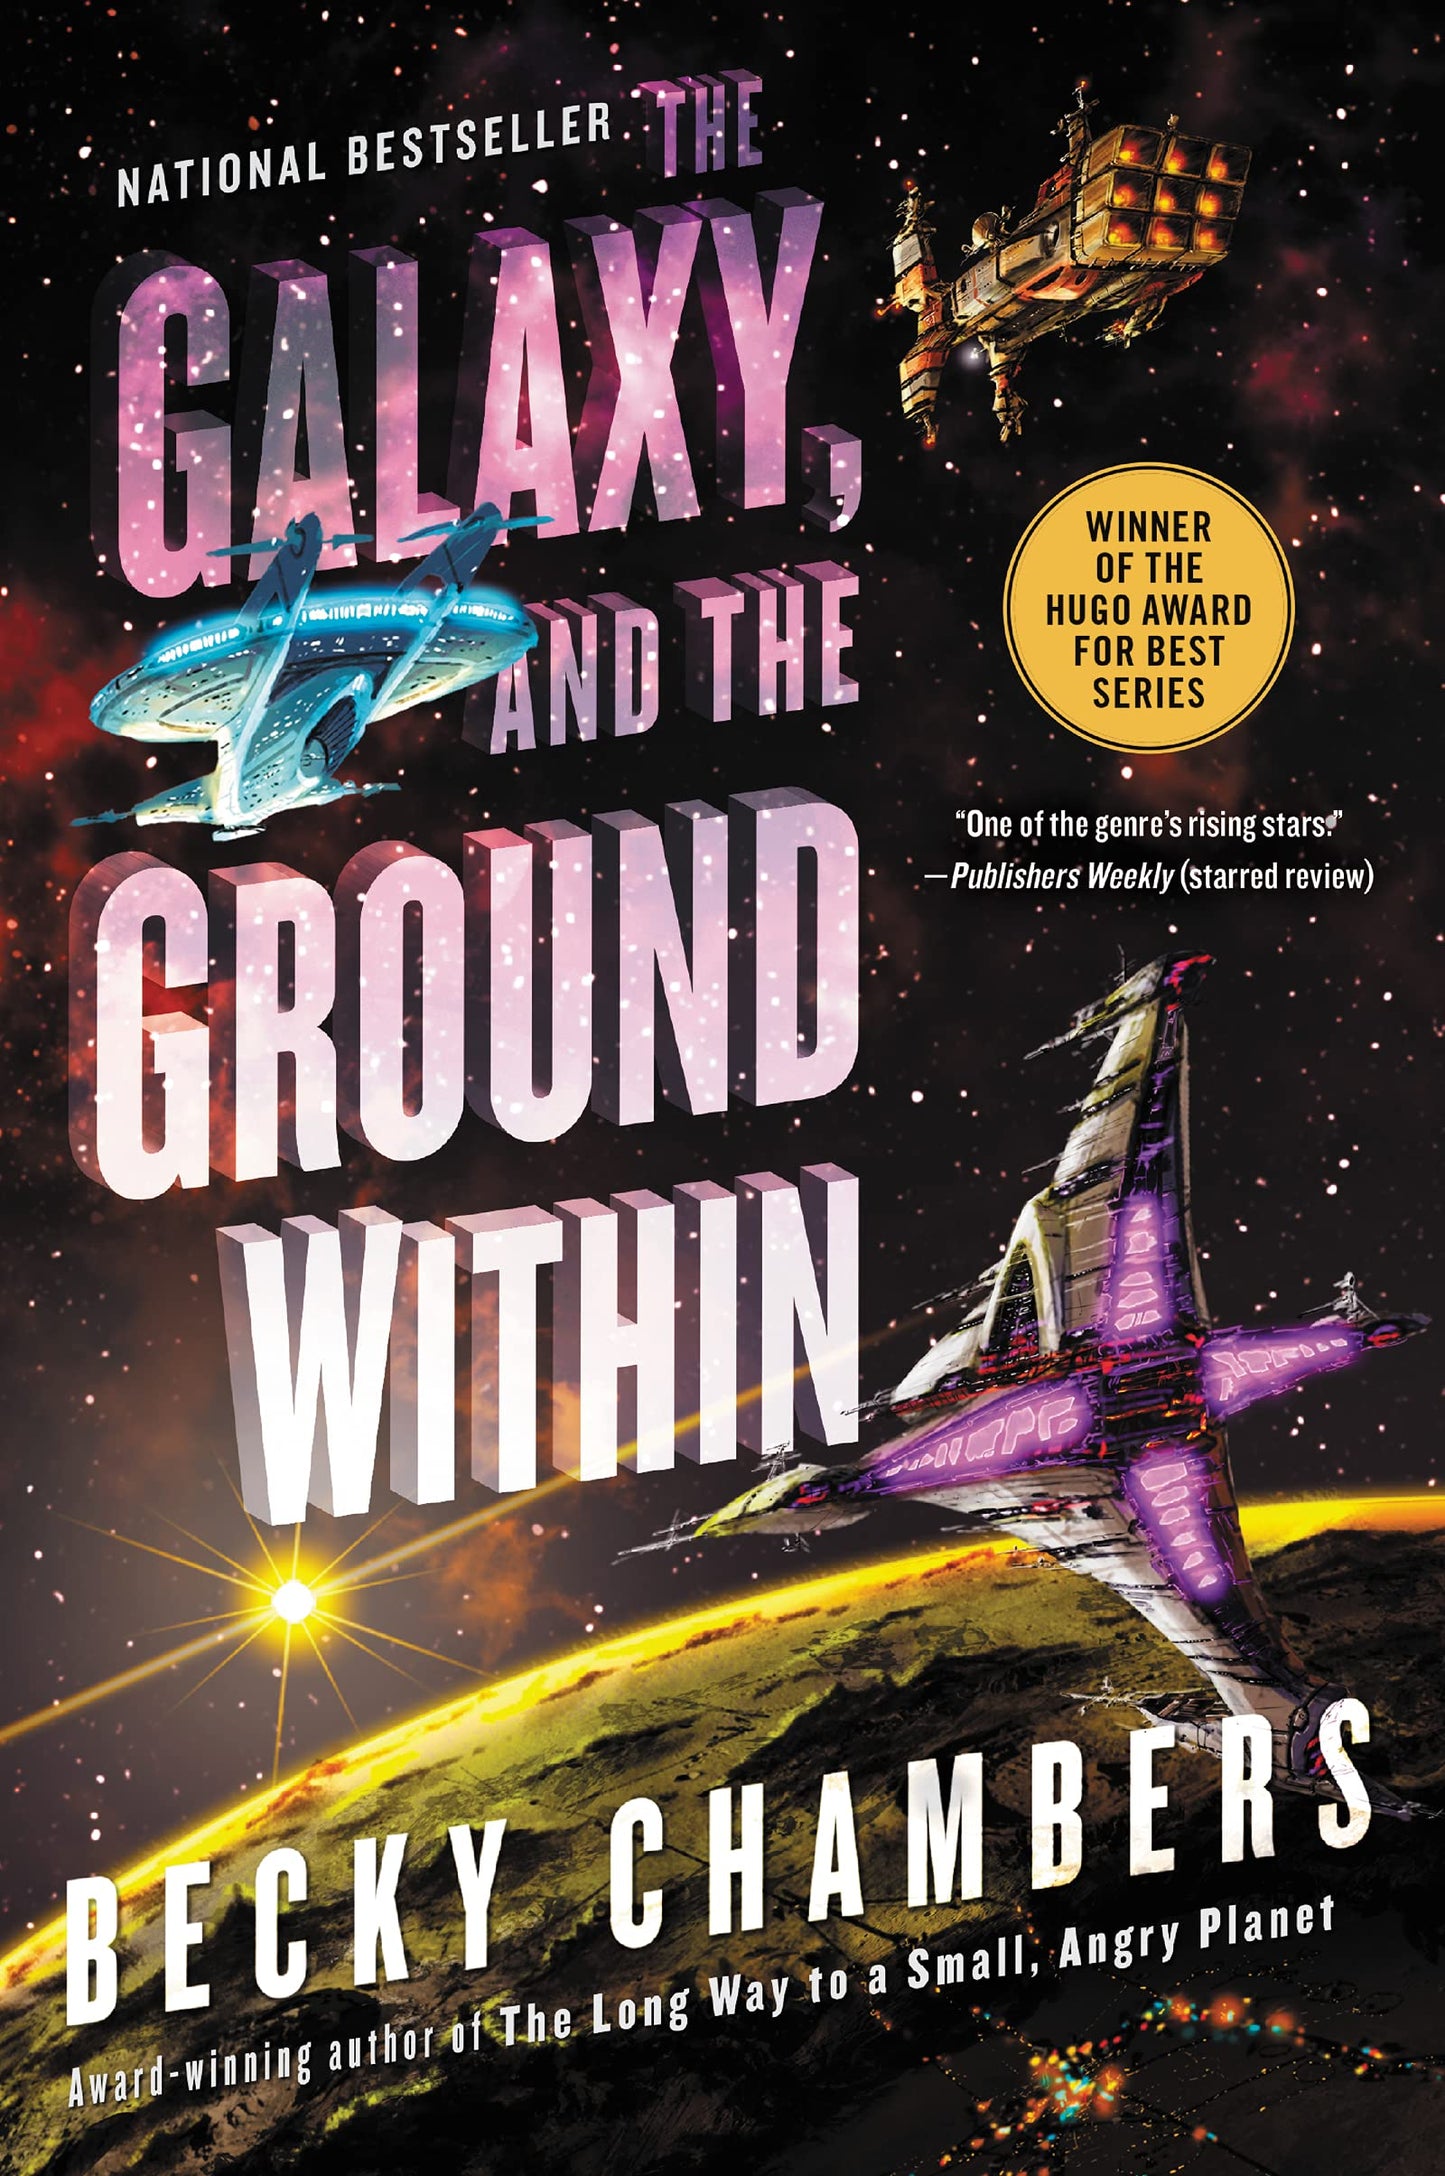 The Galaxy, and the Ground Within: Wayfarers Book 4